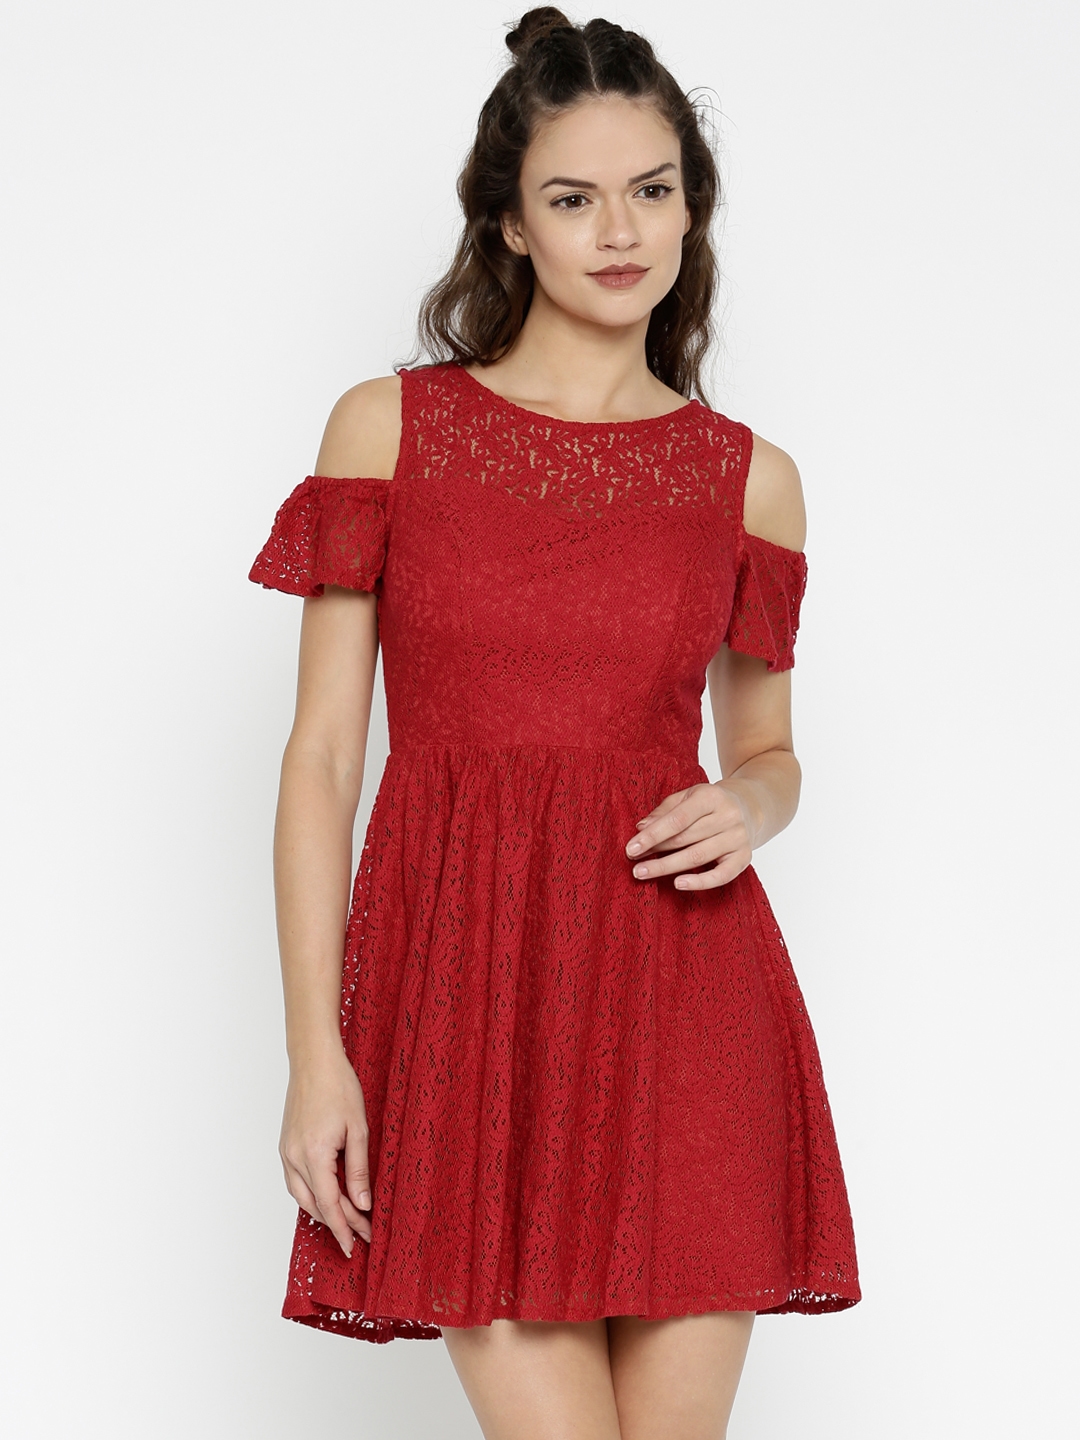 Red Lace Fit ☀ Flare Dress - Dresses ...